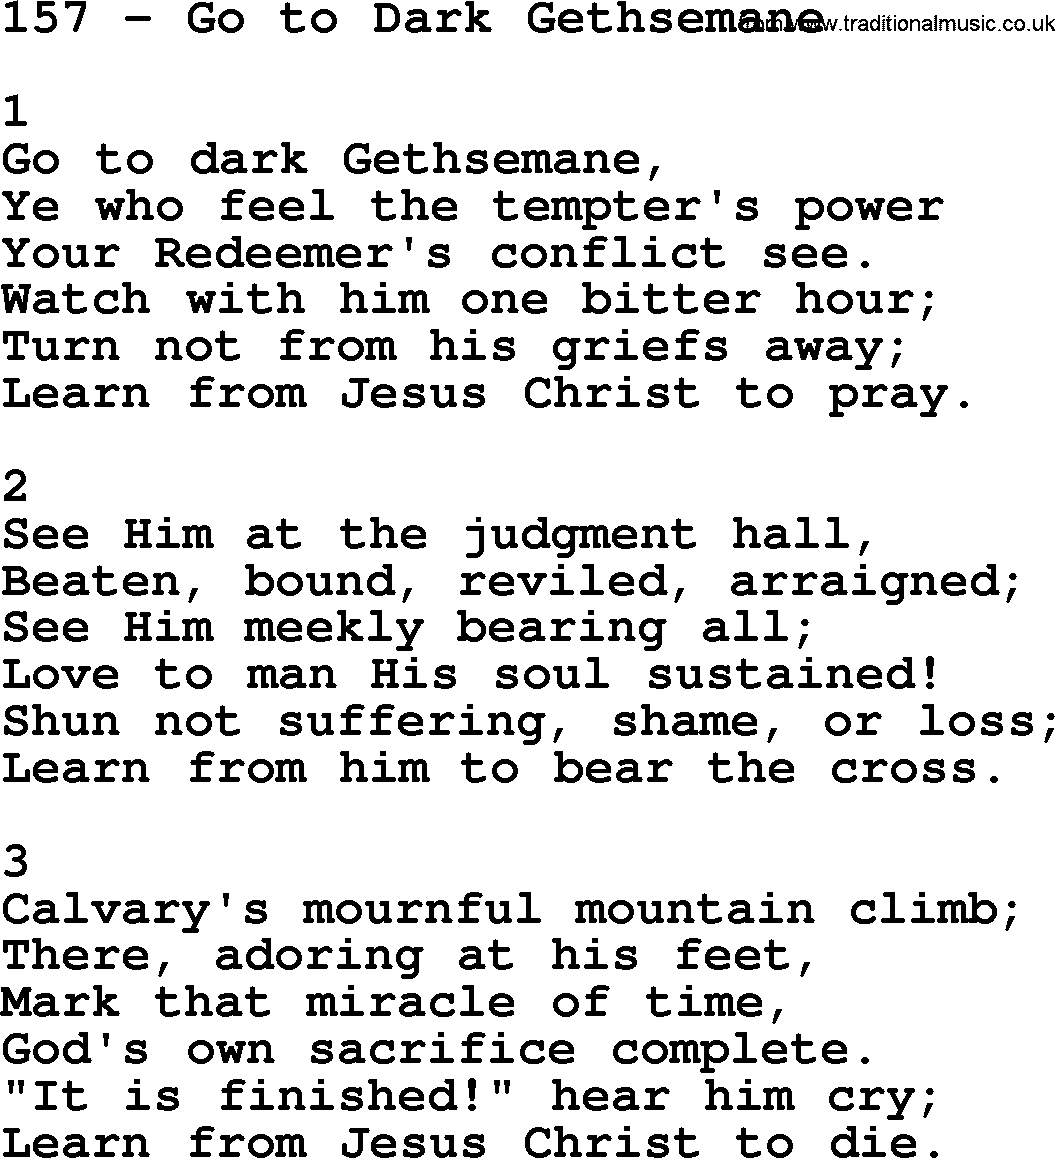 Complete Adventis Hymnal, title: 157-Go To Dark Gethsemane, with lyrics, midi, mp3, powerpoints(PPT) and PDF,